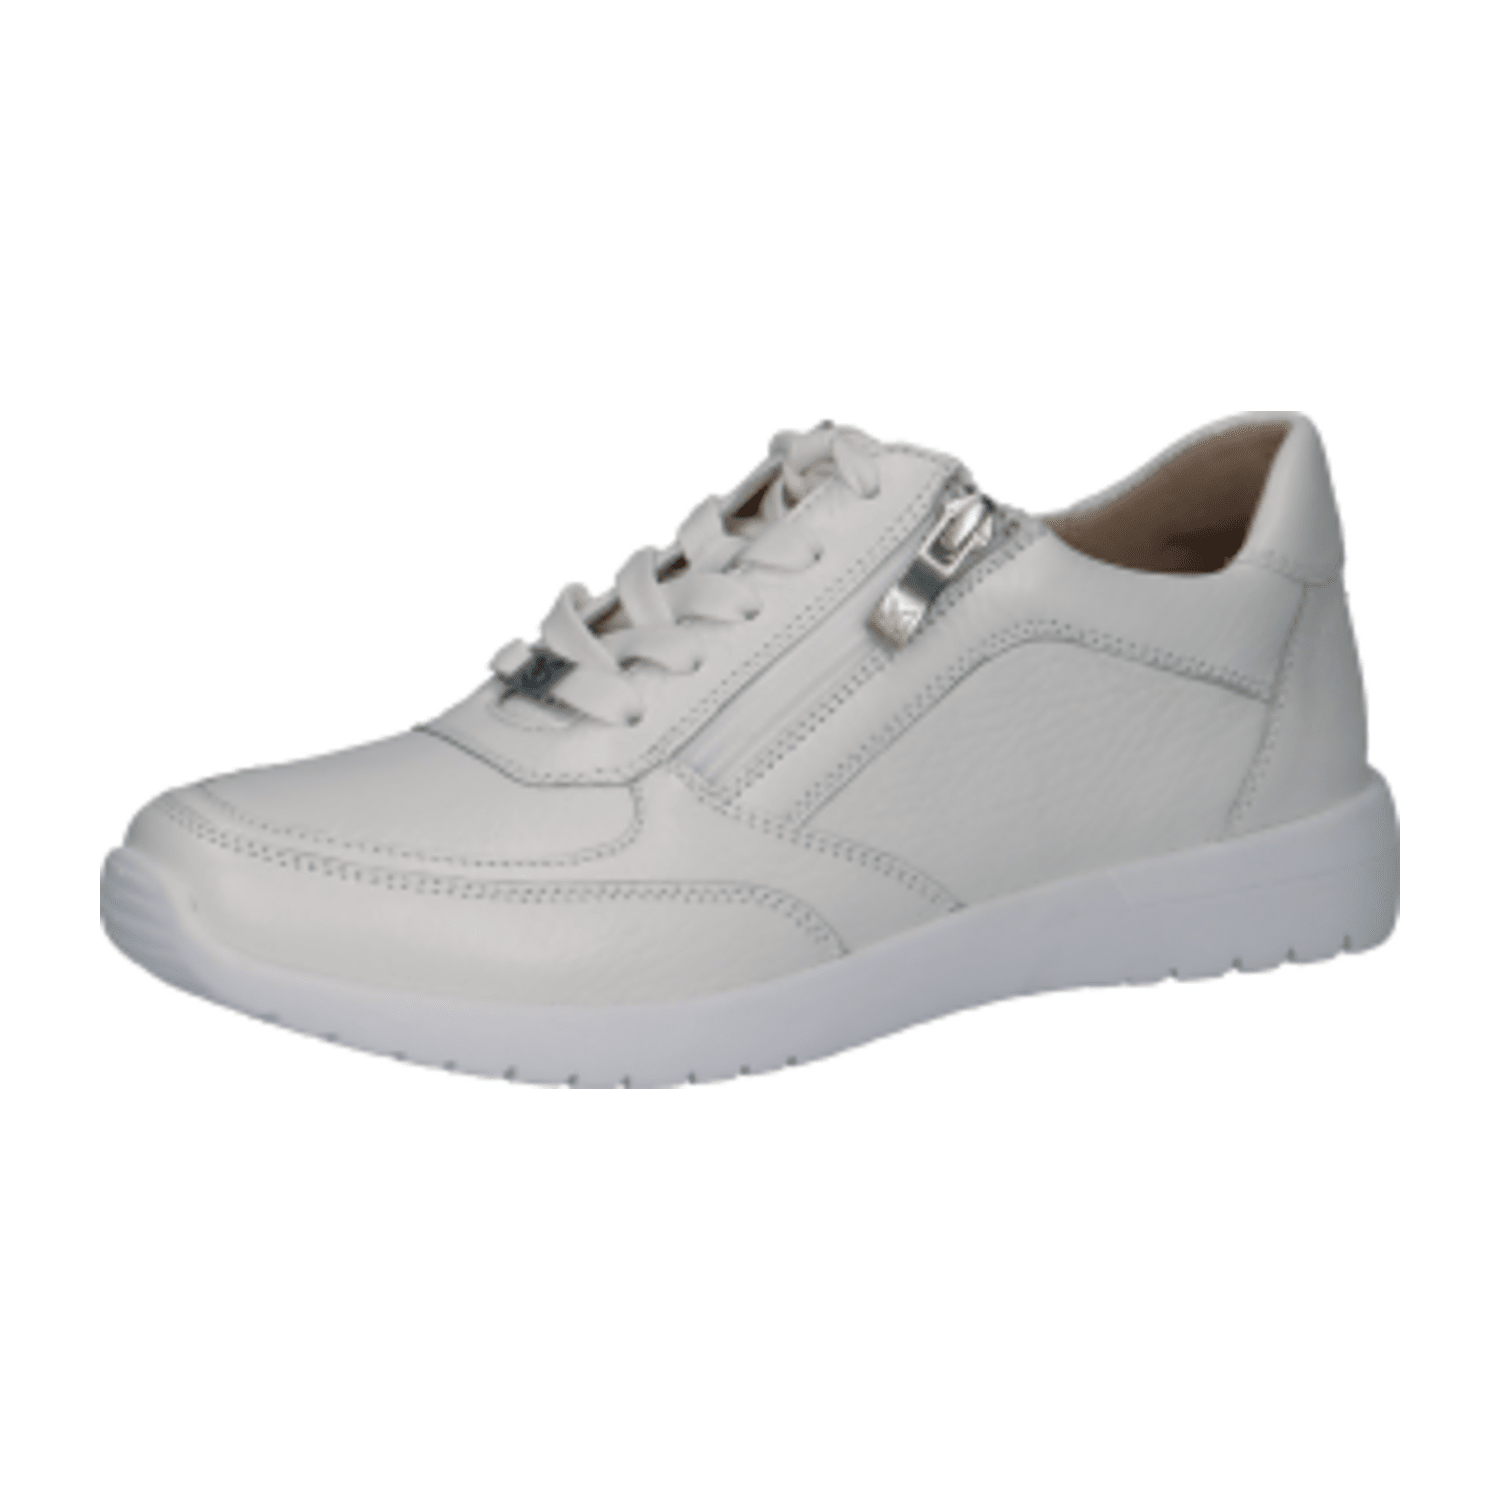 Caprice Women Lace-up